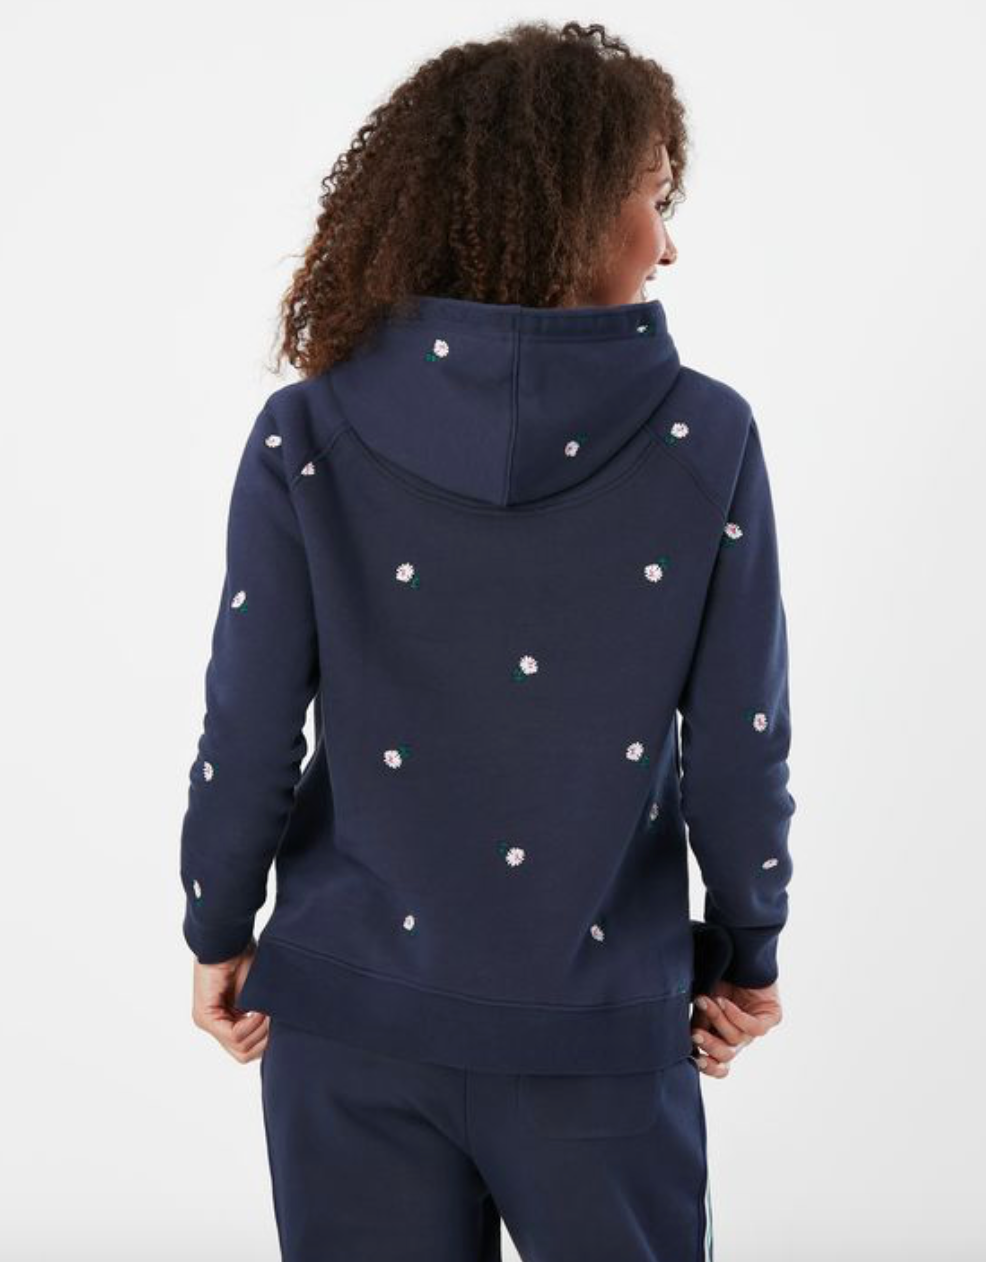 Rowley Hooded Sweatshirt in Embroidered Navy Ditsy